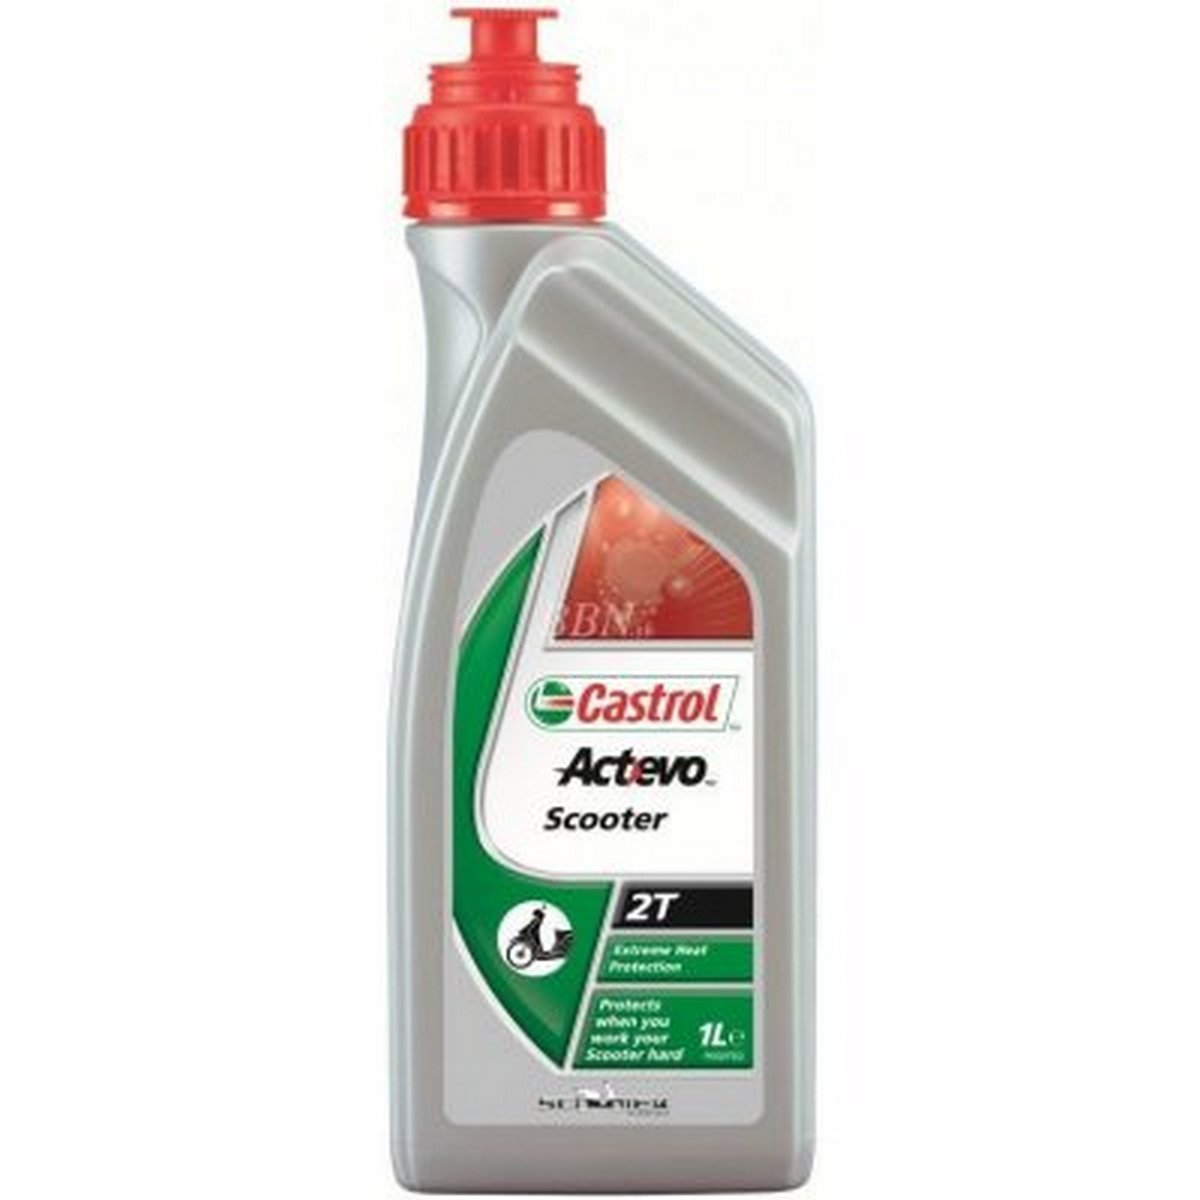 Castrol ACT EVO Scooter 2T